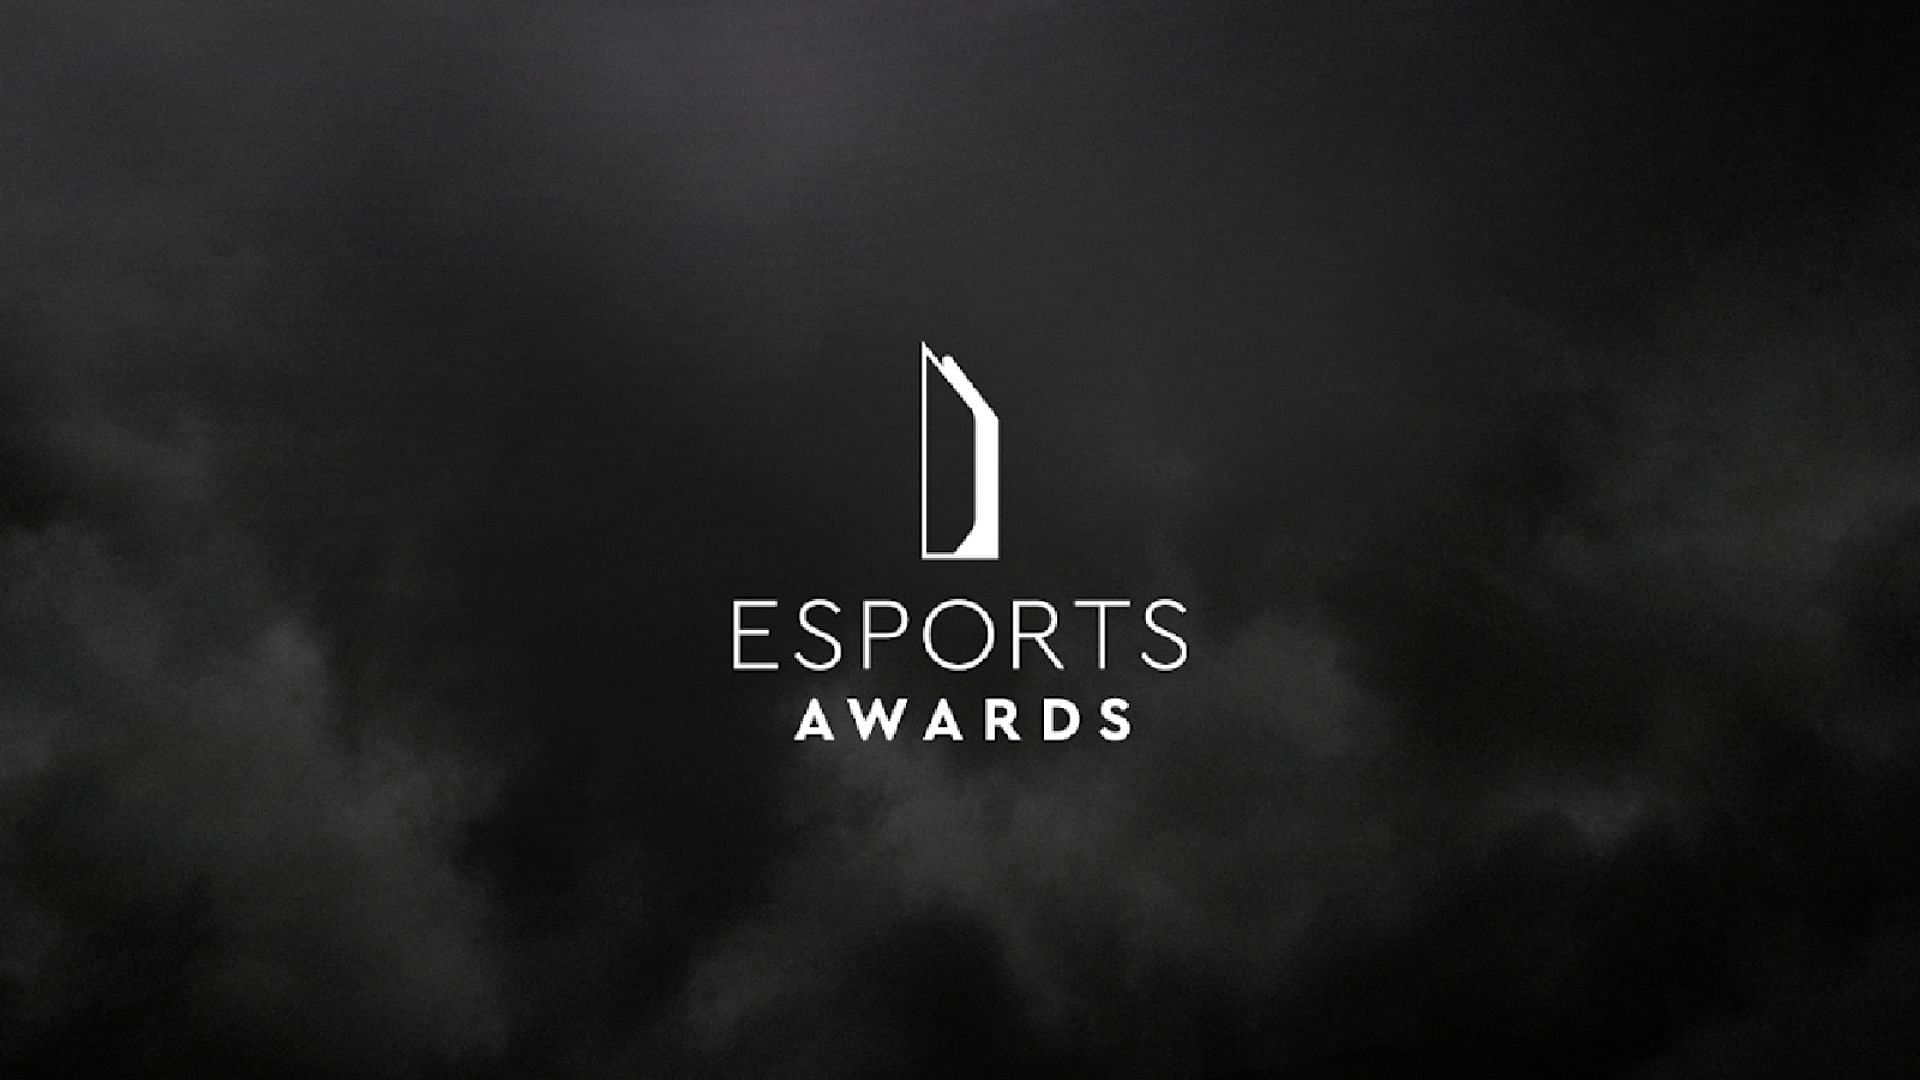 10 organizations were nominated for the Content Group of the Year (Image via Esports Awards)